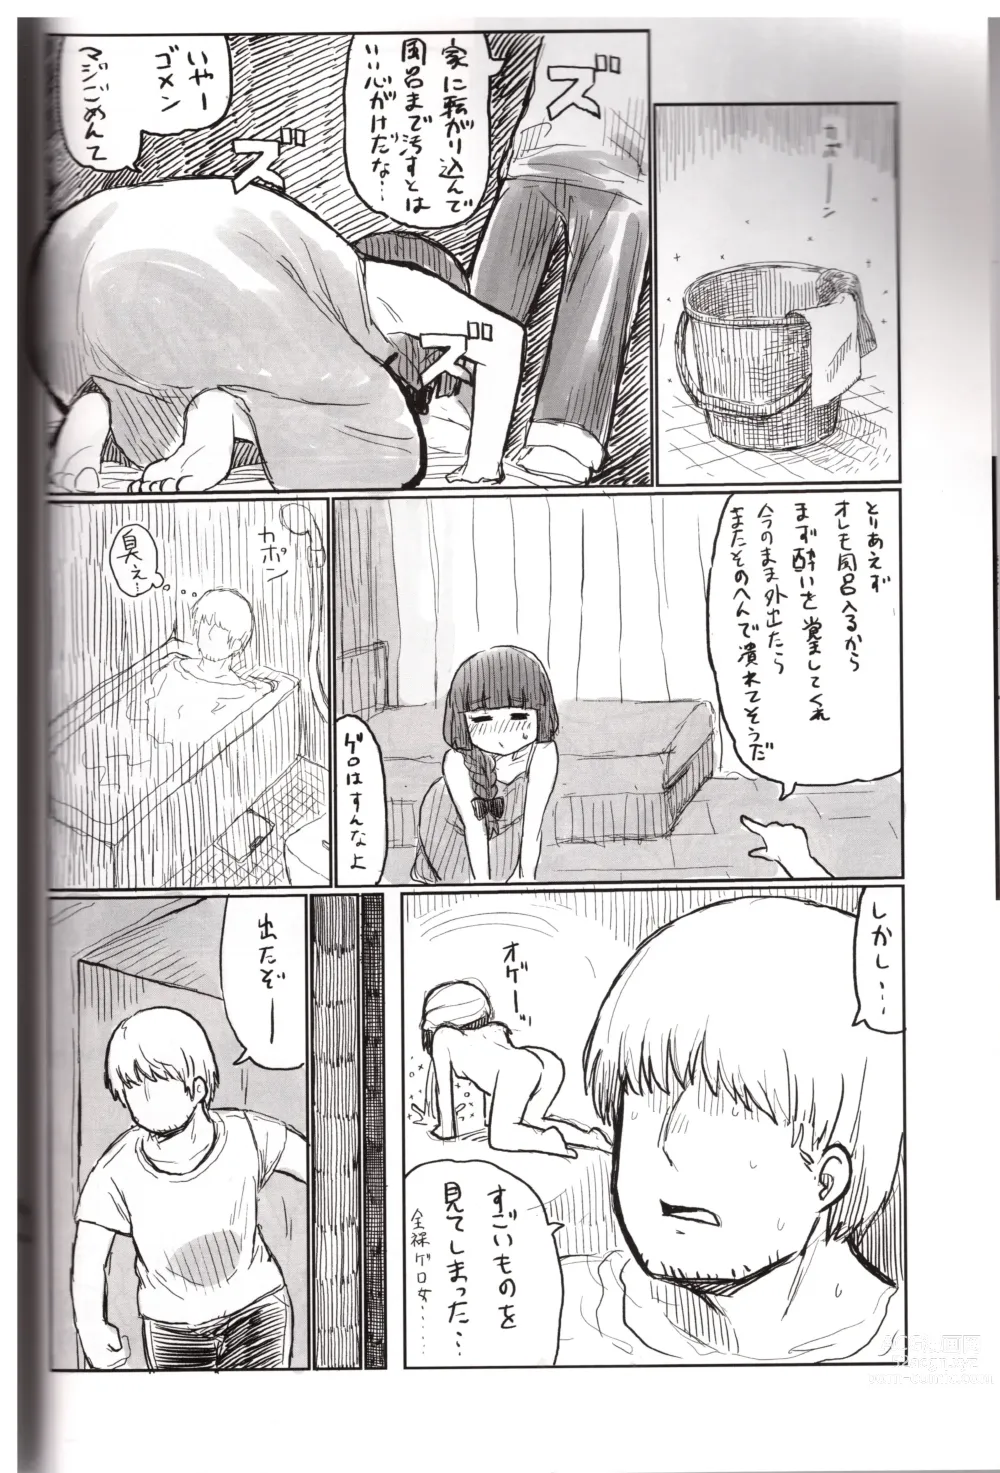 Page 5 of doujinshi On the Rock!